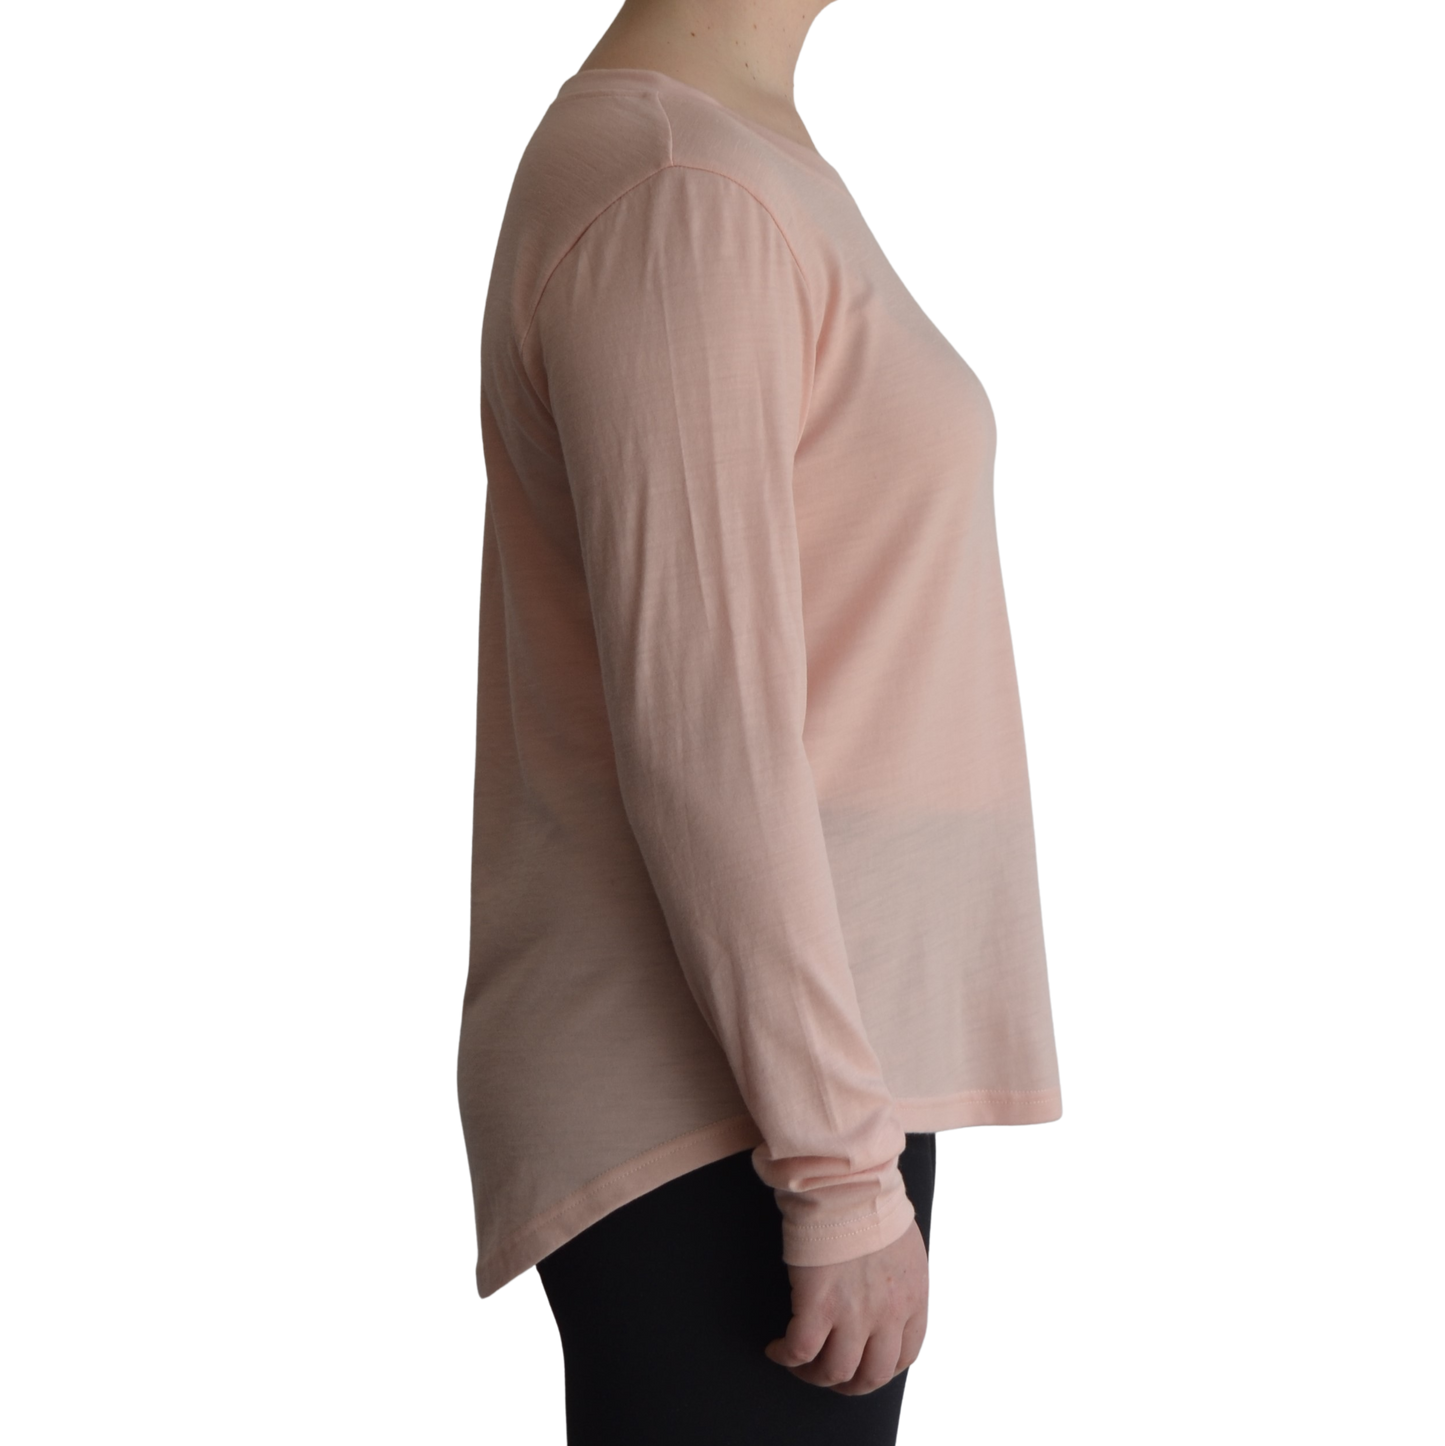 Links long sleeve merino top in petal light pink colour, model is standing in profile showing the side view of the shirt with a scooped hemline that drops lower at the back. 